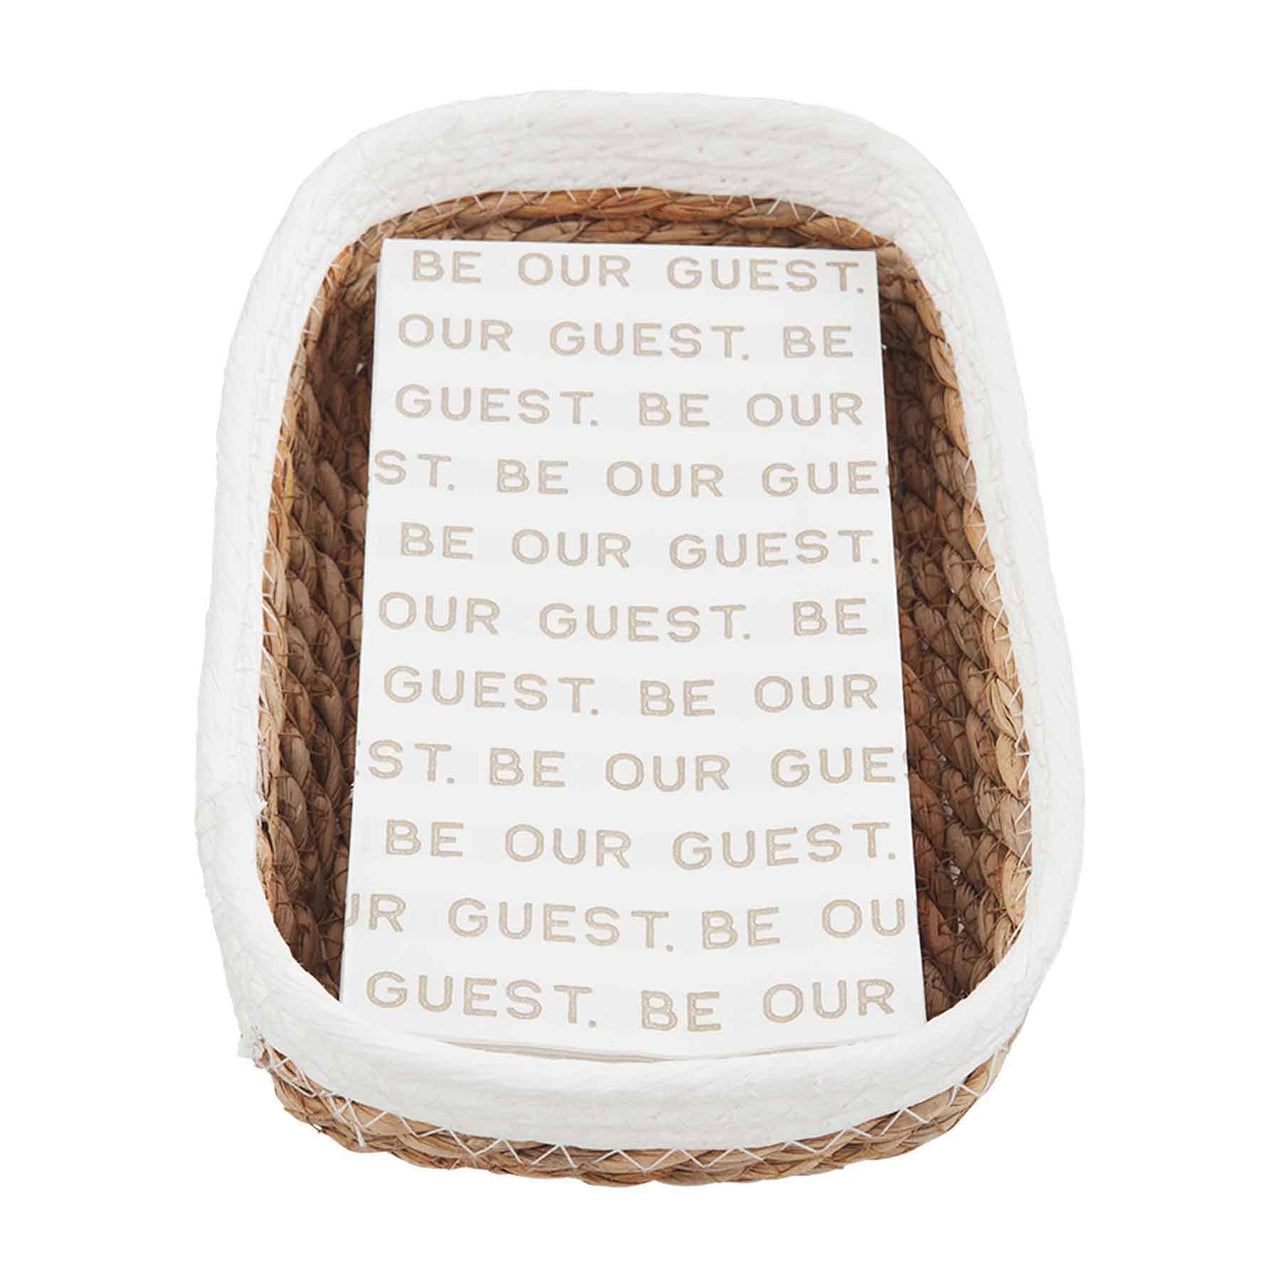 BE OUR GUEST TOWEL SET